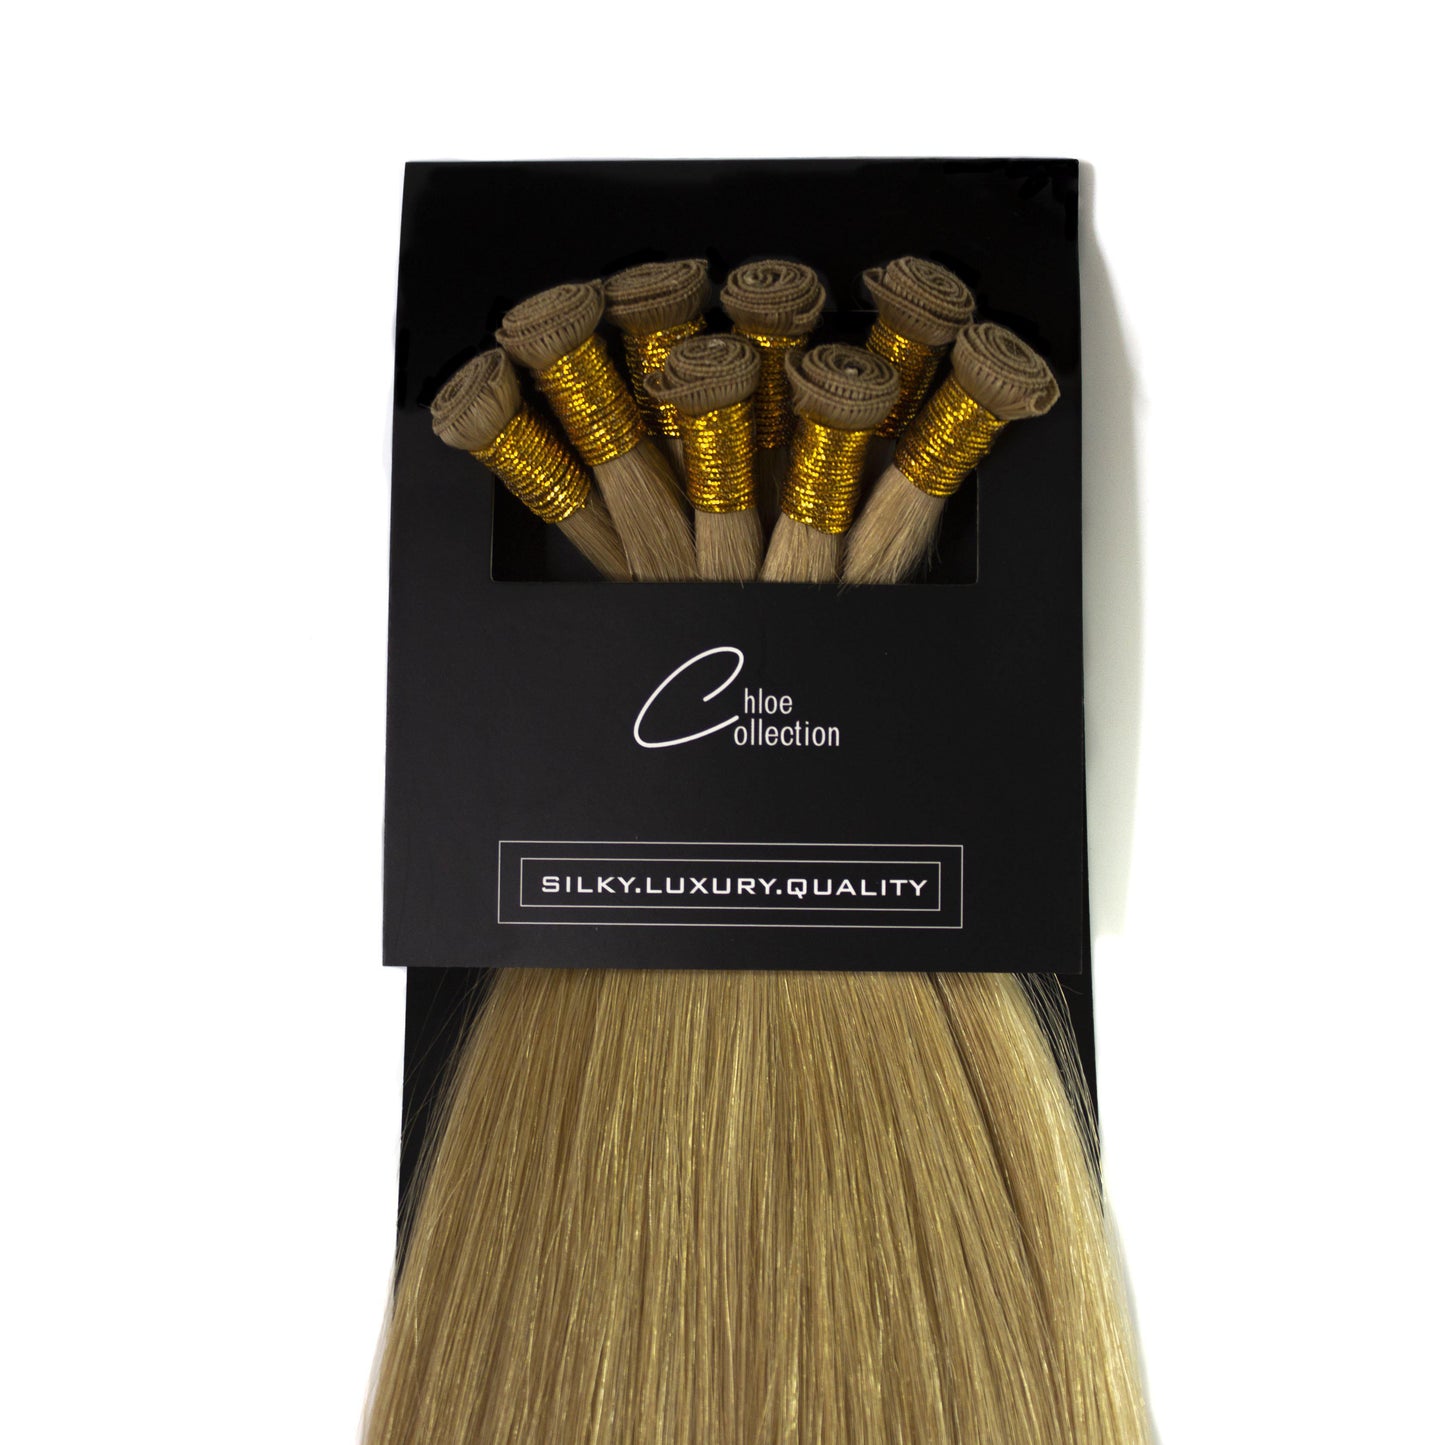 Chloe Collection - Hand tied 18" #22 - 114g.